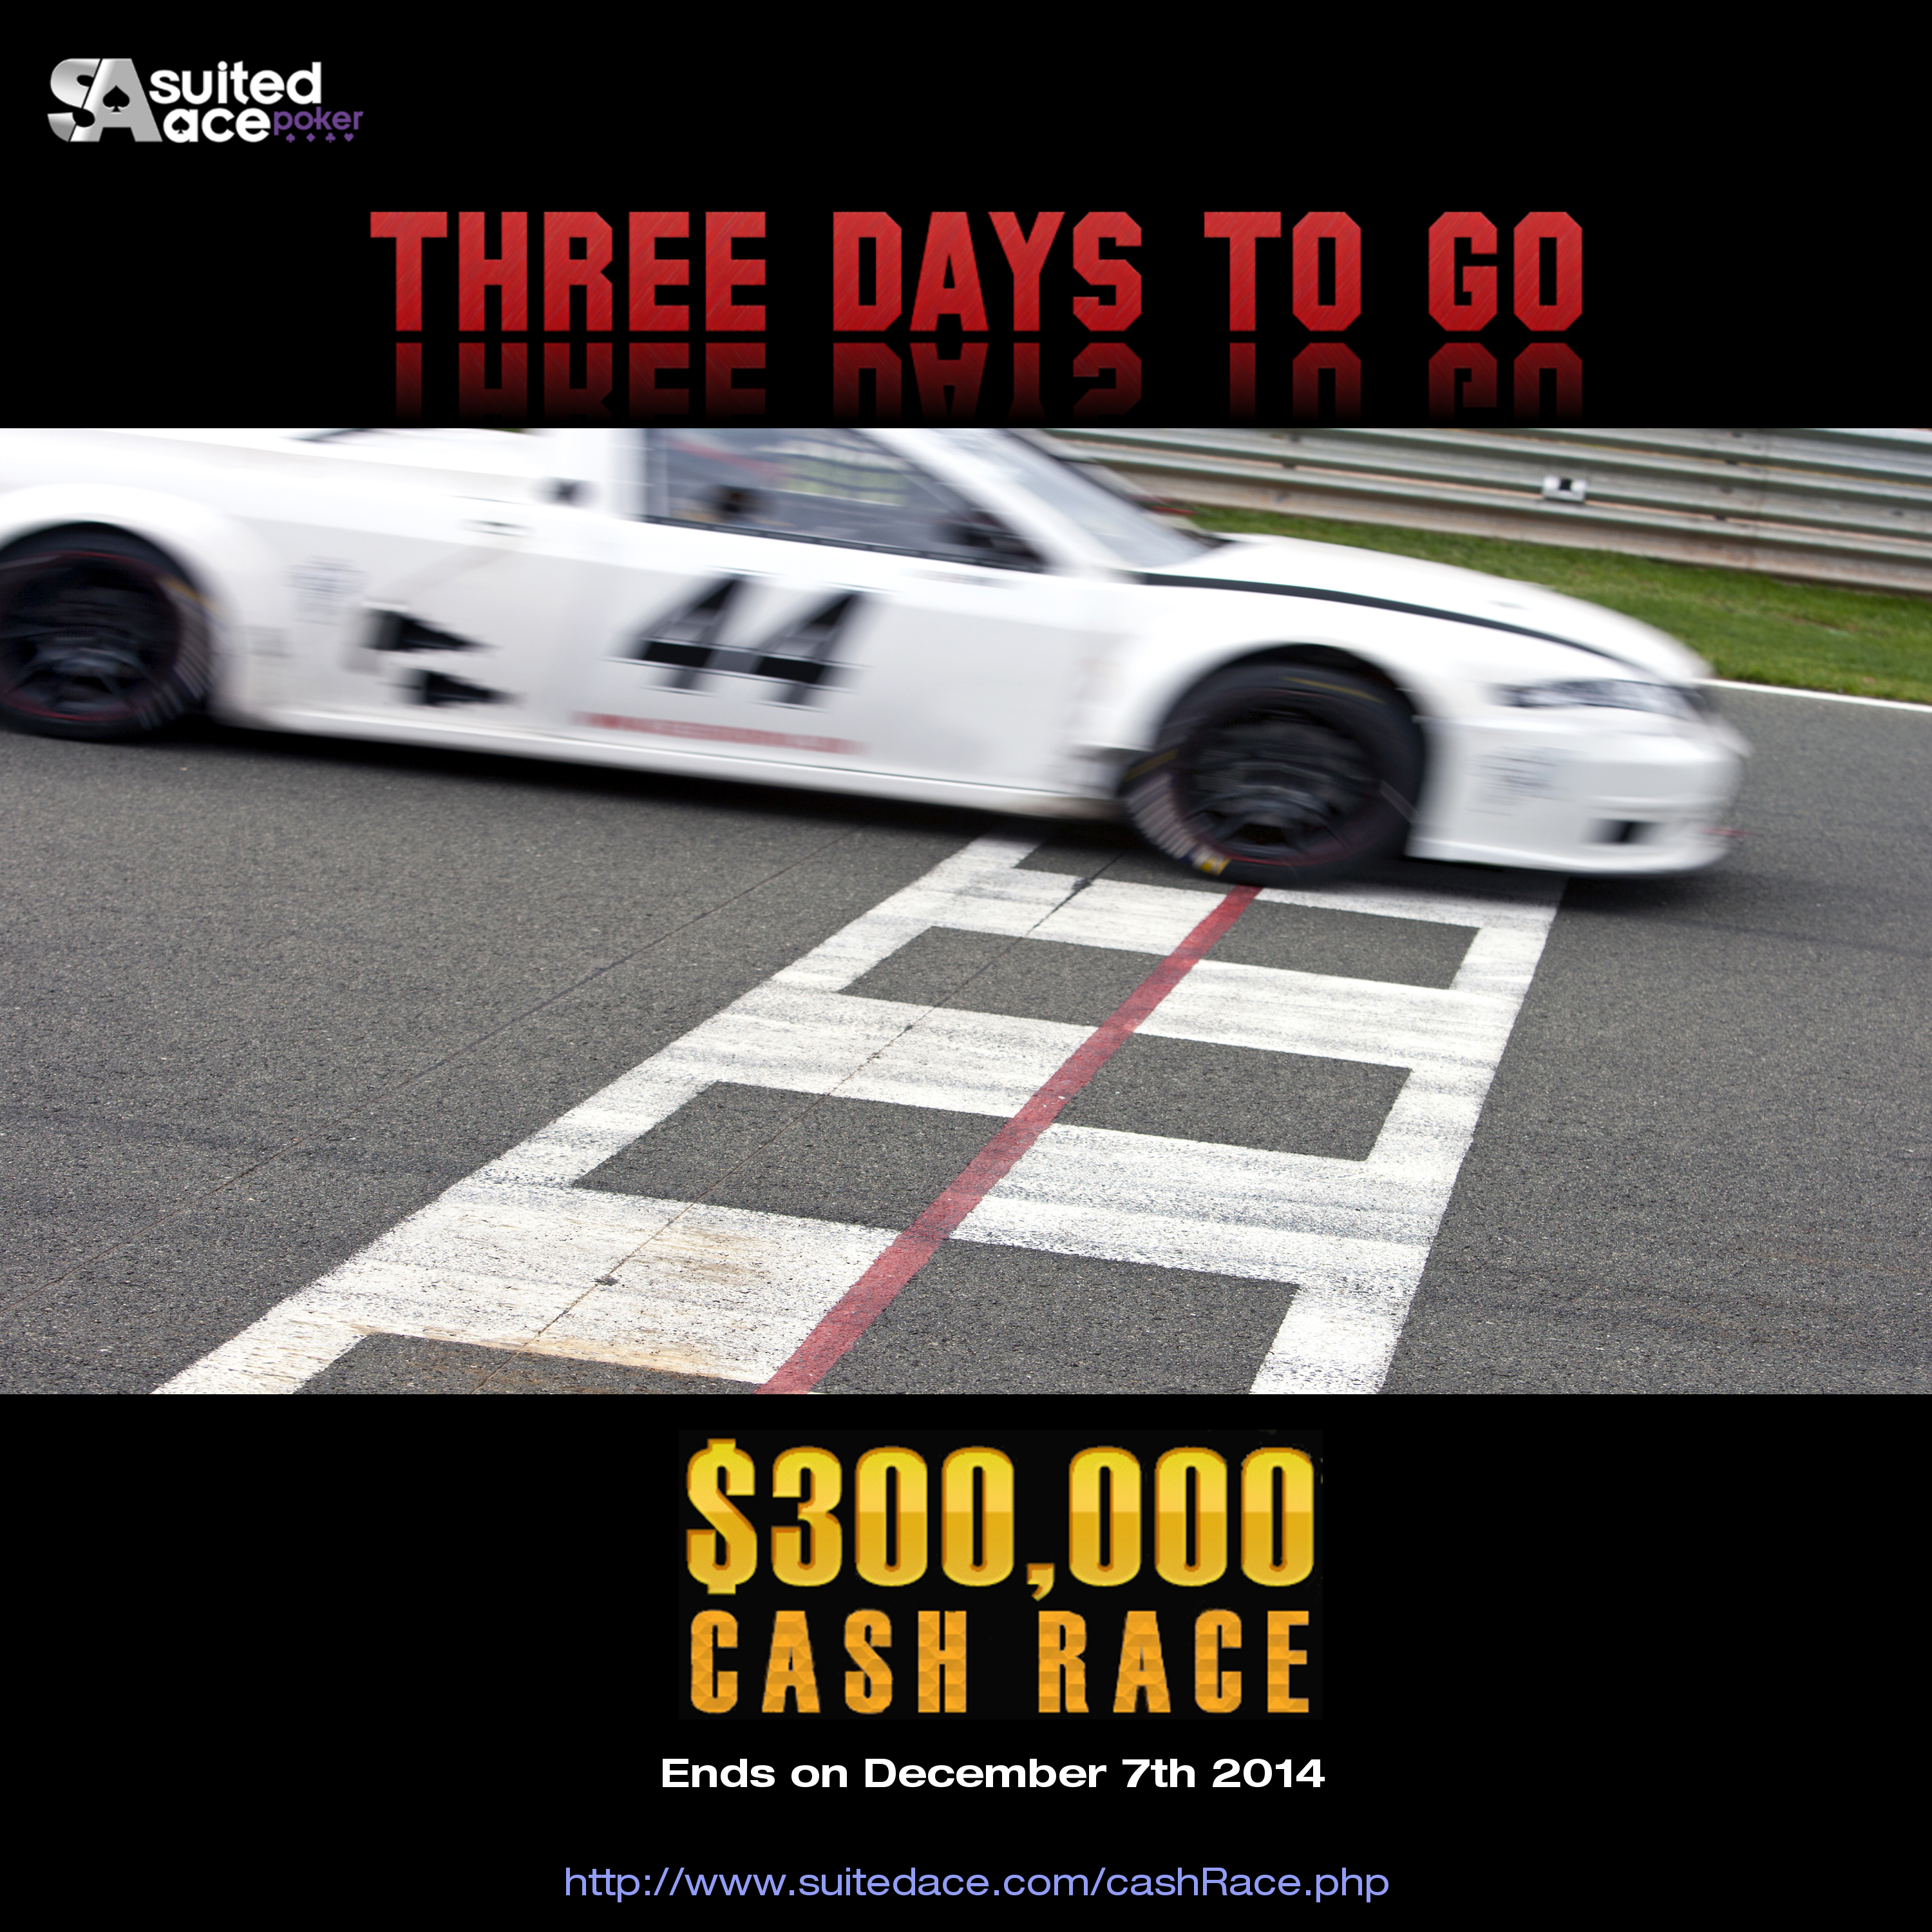 Three days to go $300,000 Cash Race ends on December 7th 2014